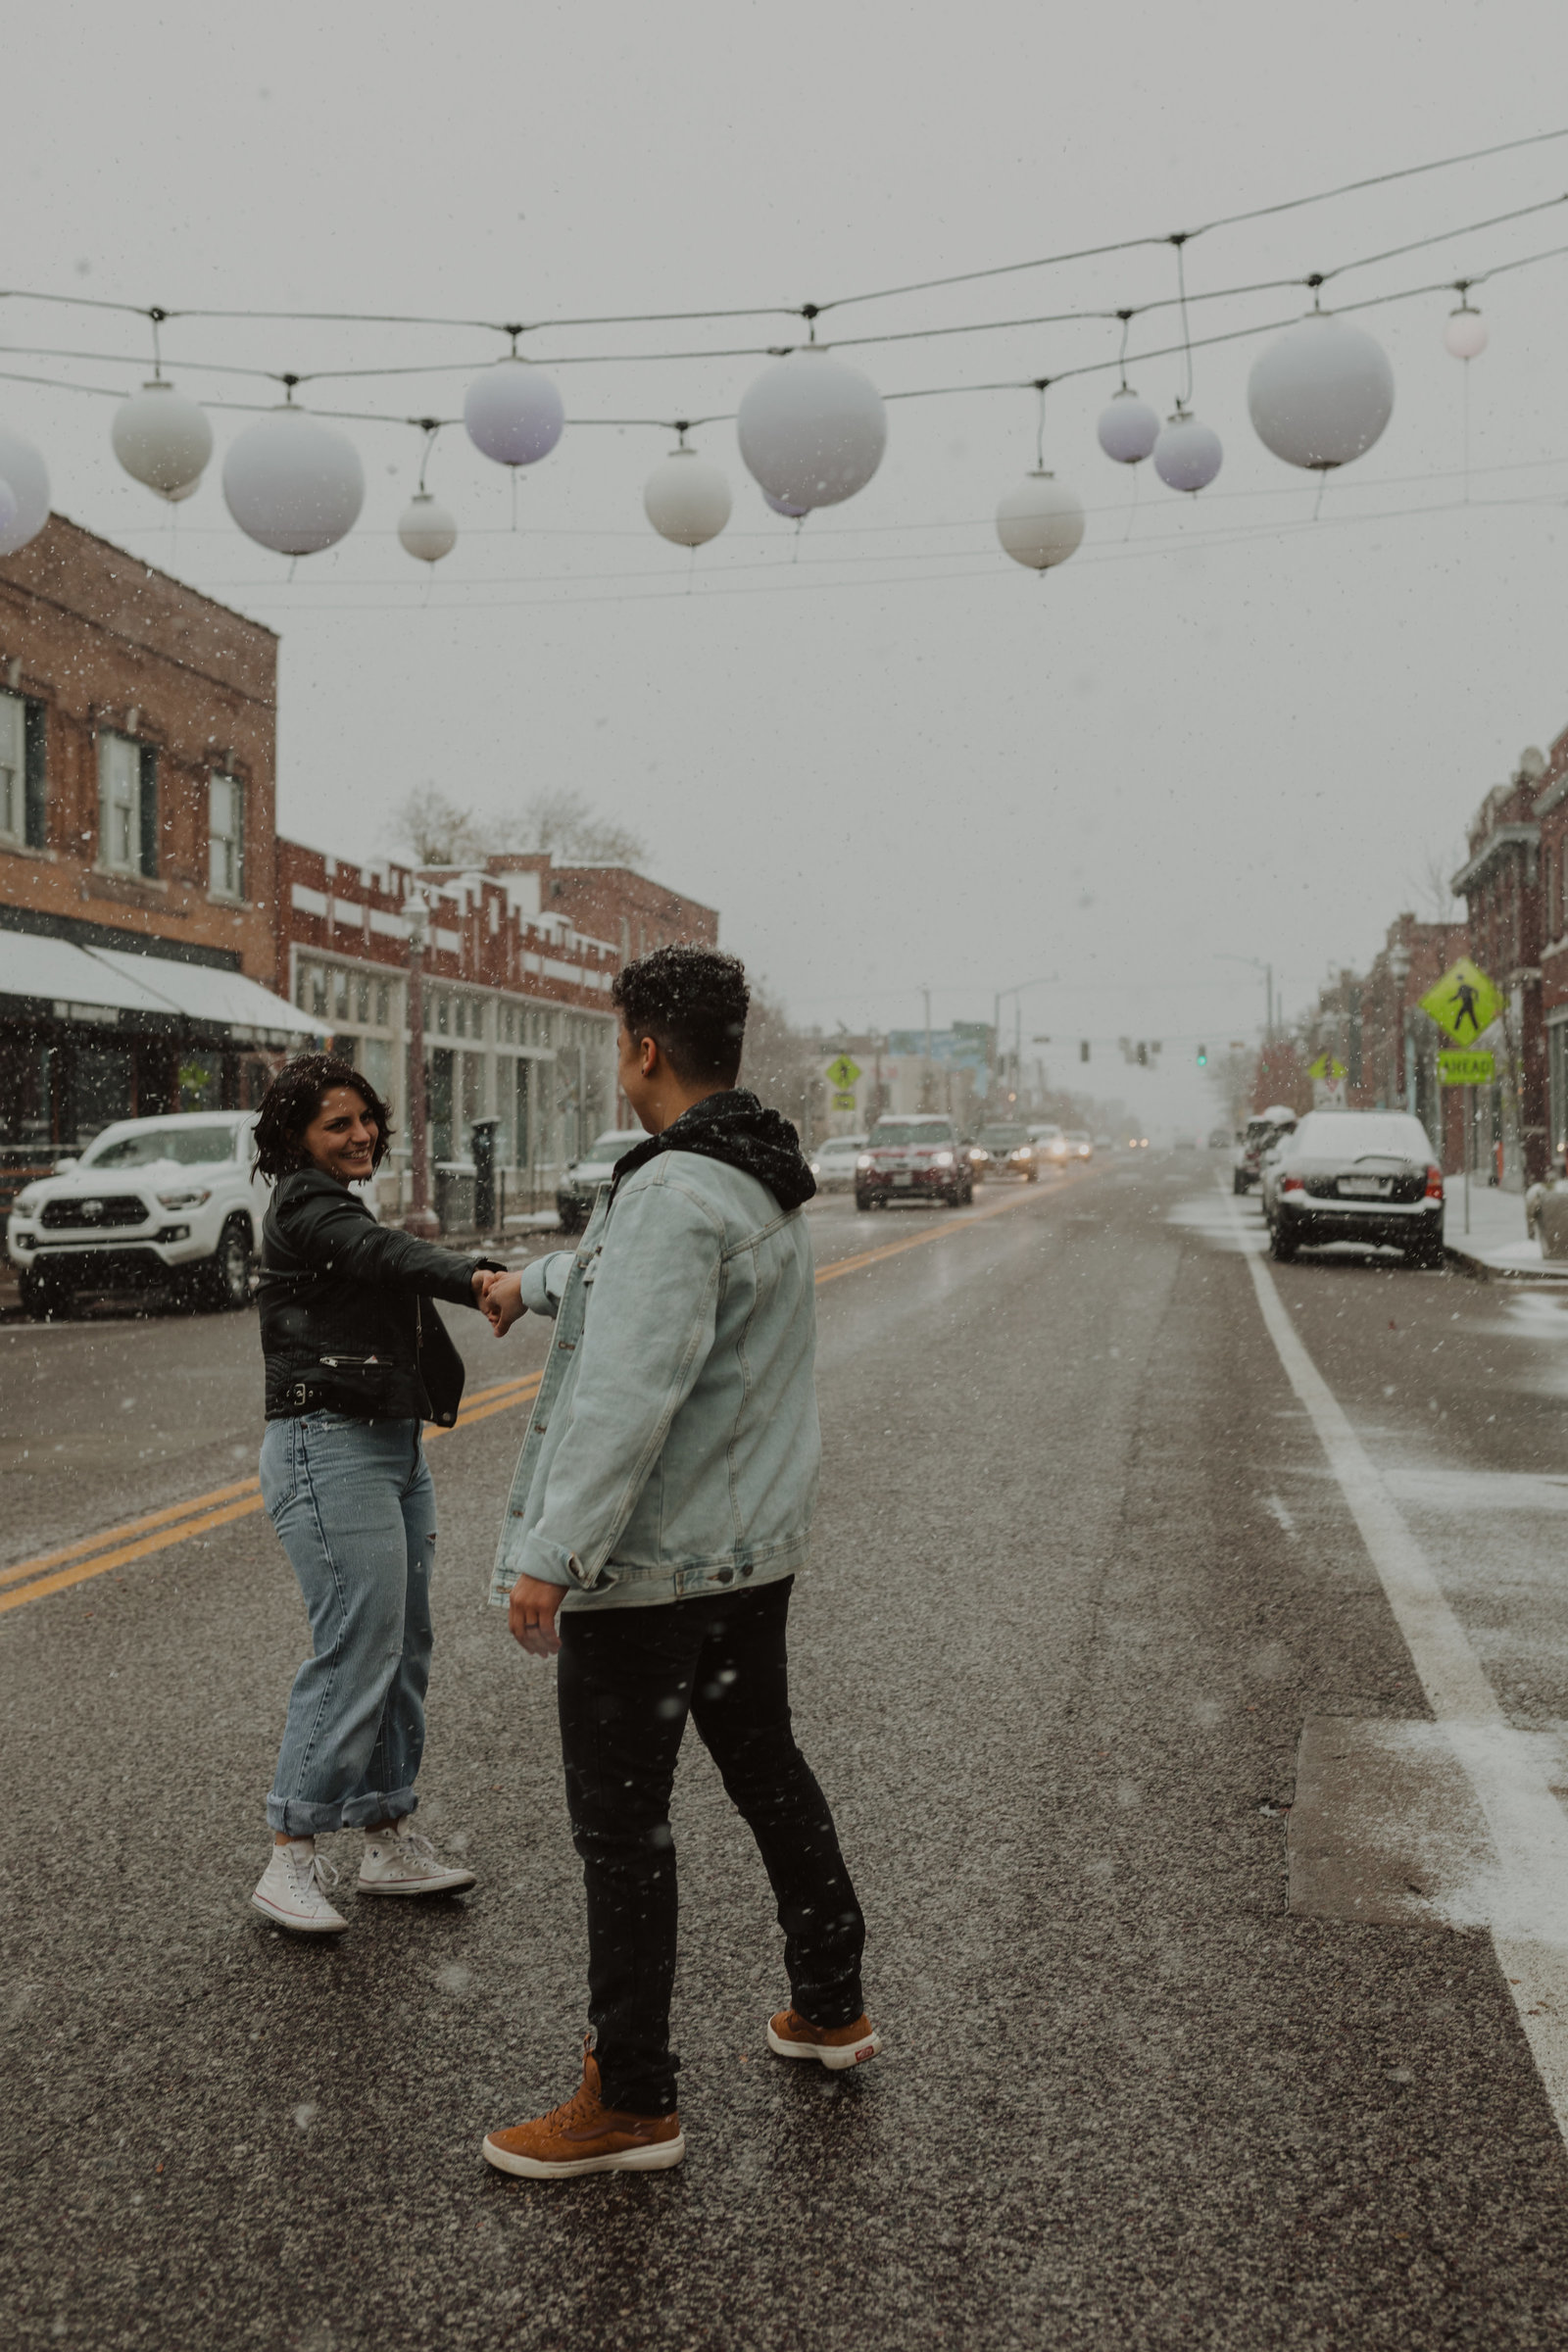 Snowfall during engagement session in STL